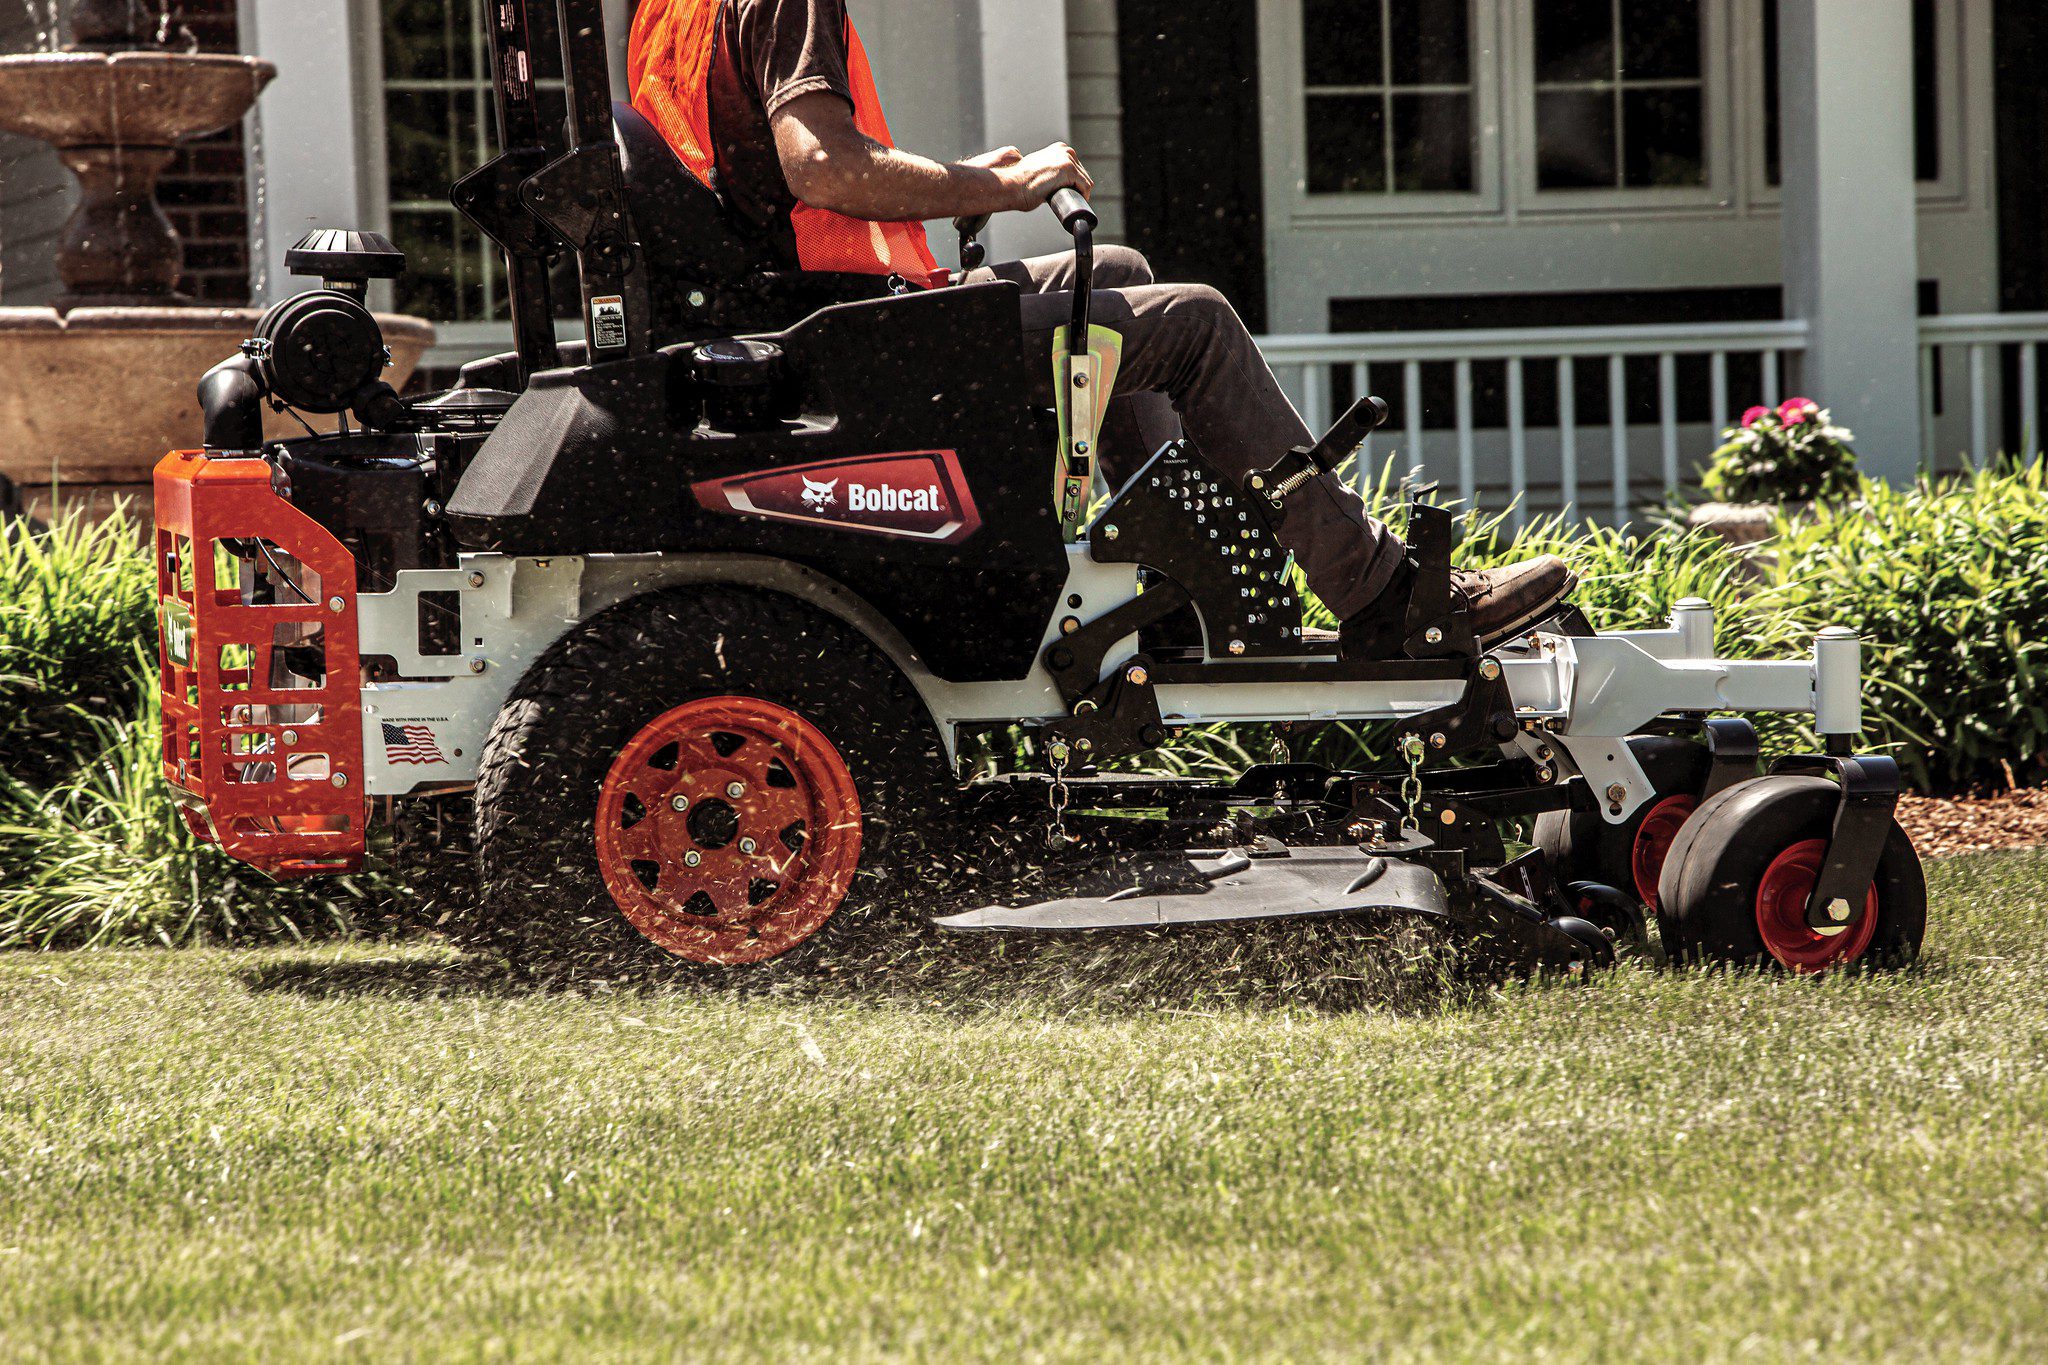 Browse Specs and more for the Bobcat ZT6000 Zero-Turn Mower 61″ - Bobcat of North Texas